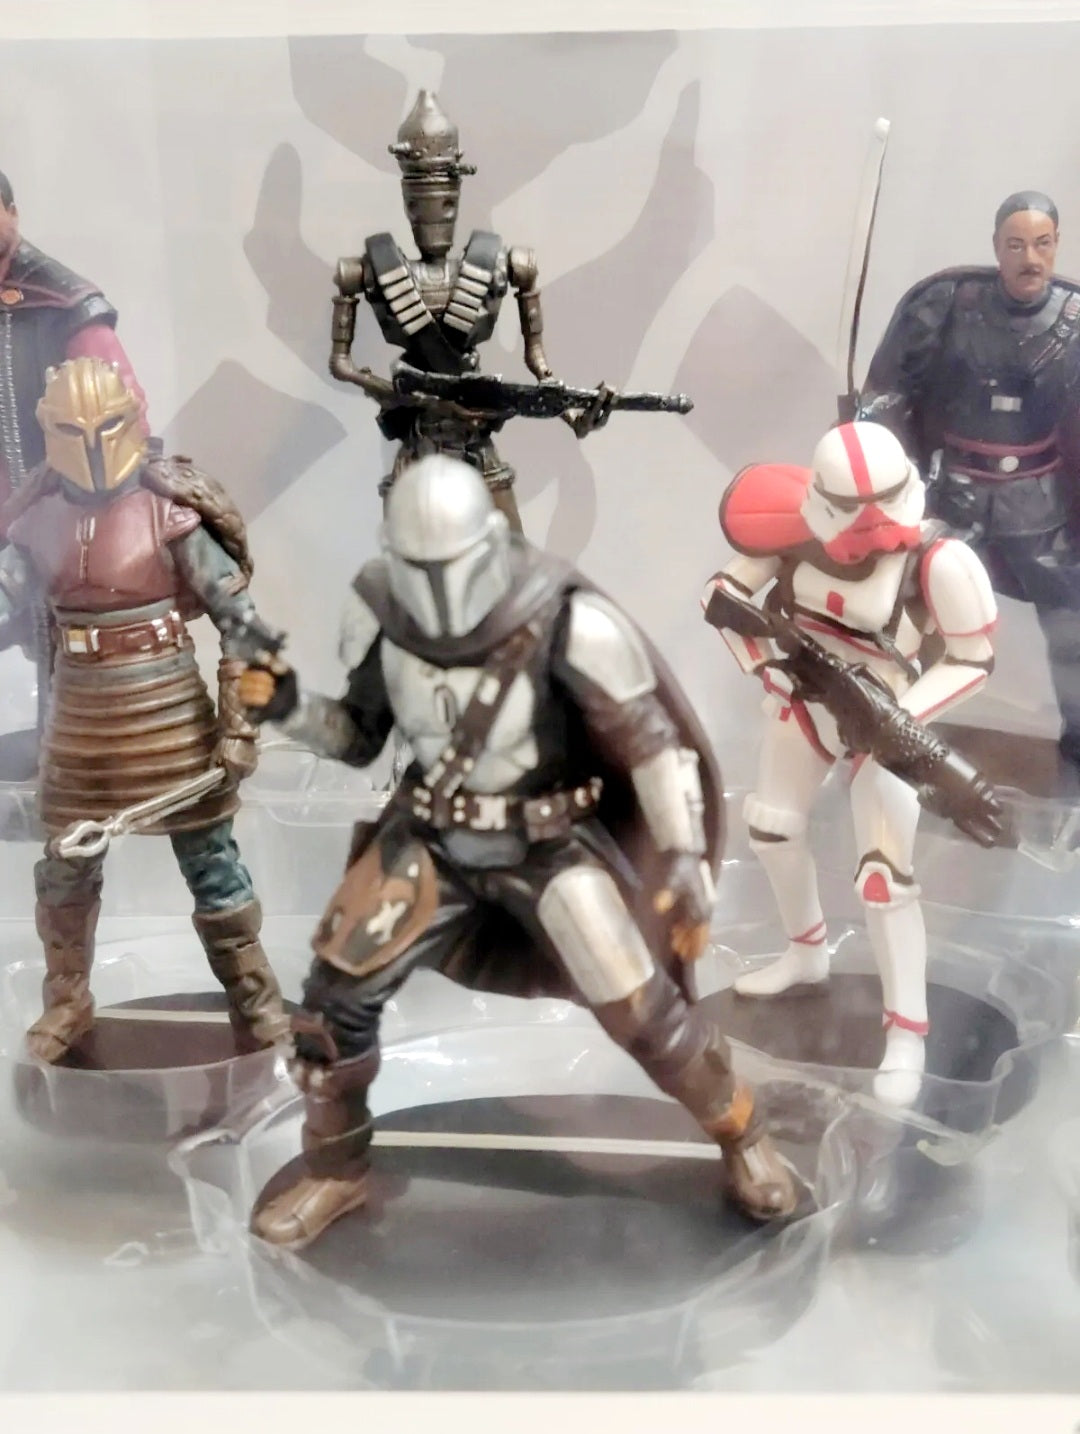 New *Star Wars The Mandalorian Deluxe Figure Play Set Toys Disney Store